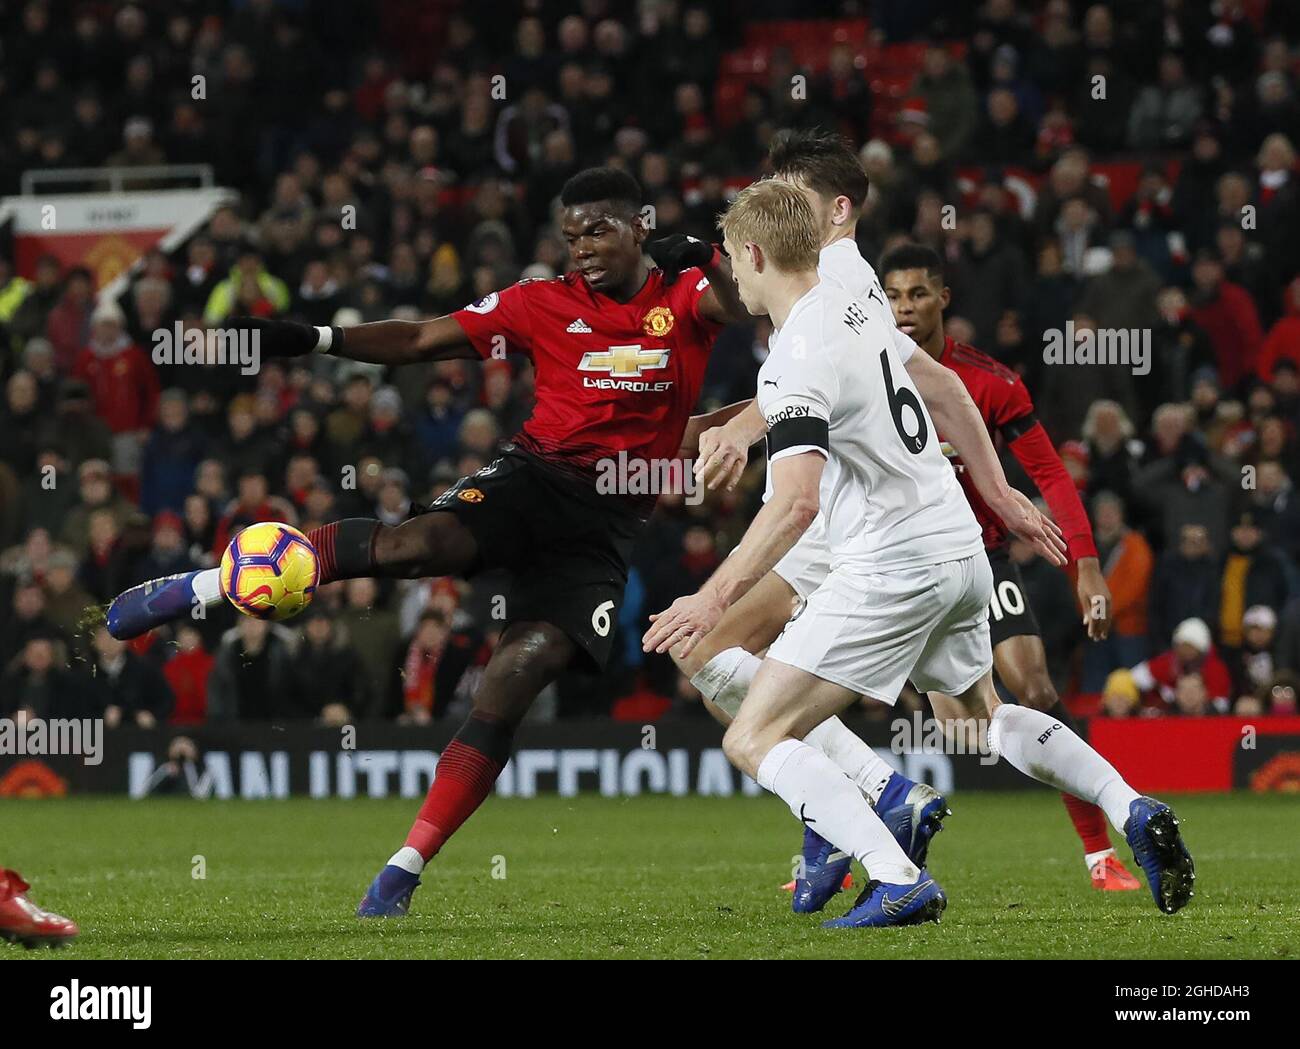 Paul Pogba of Manchester United produces a half volley during the Premier  League match at Old Trafford, Manchester. Picture date: 29th January 2019.  Picture credit should read: Simon Bellis/Sportimage via PA Images